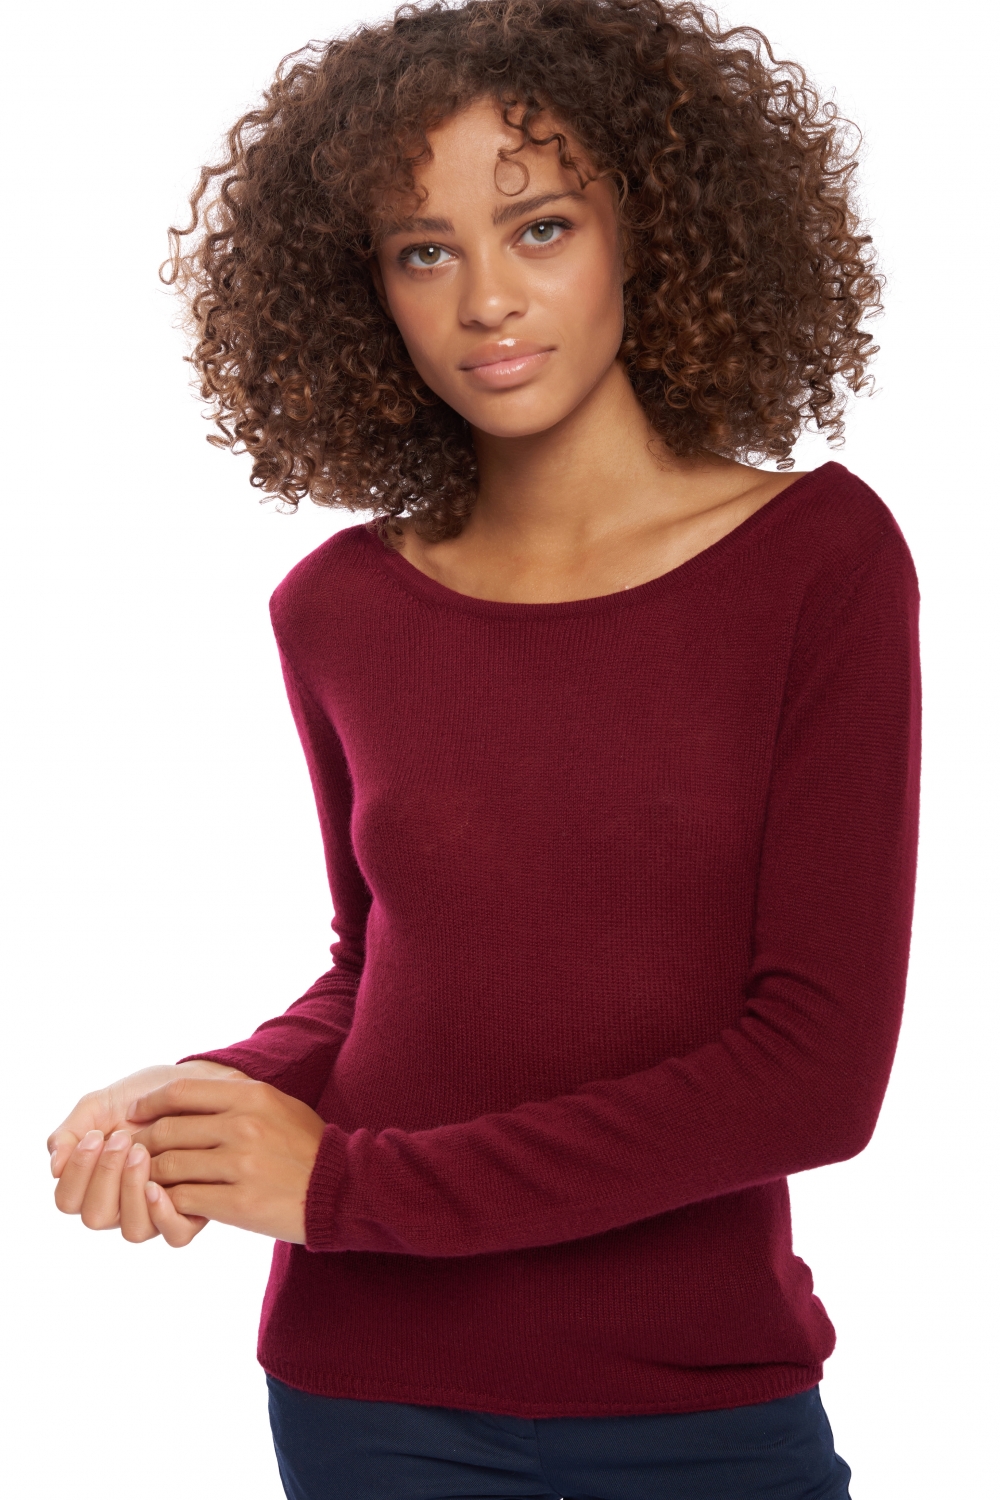 Cashmere ladies basic sweaters at low prices caleen bordeaux 4xl